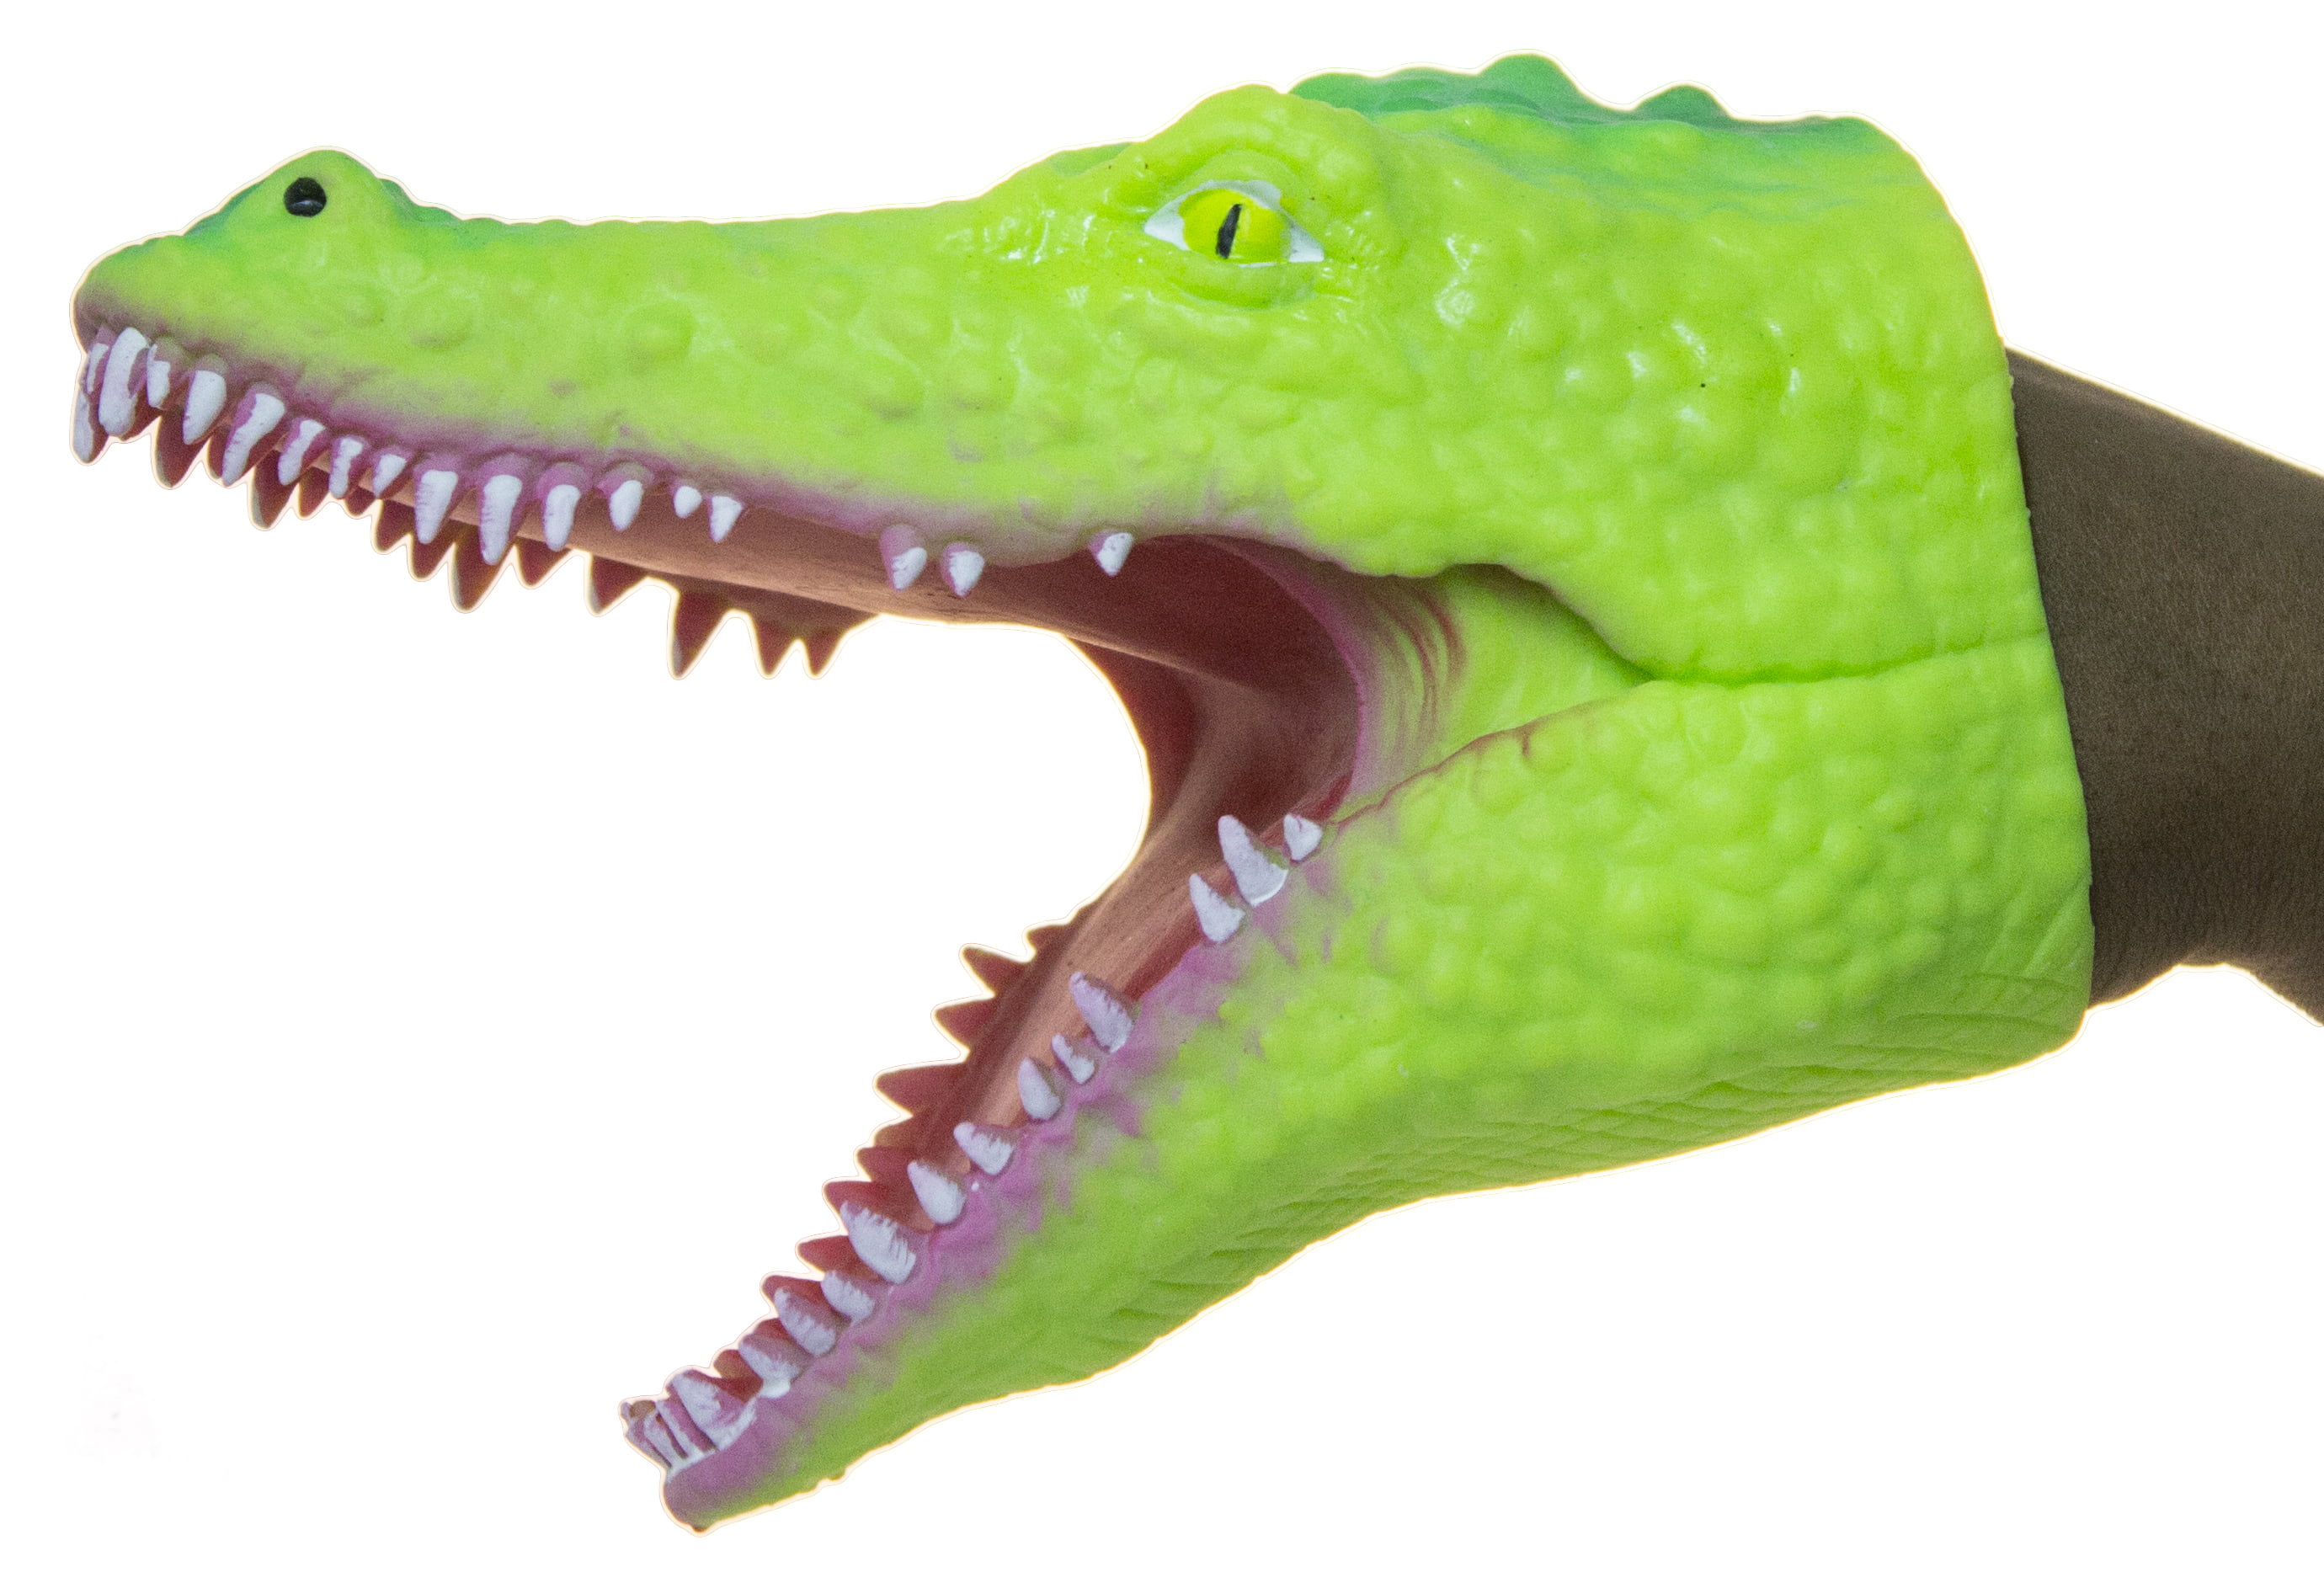 TWO CROCODILE HAND PUPPET GREEN  GIFT FLEXIBLE  PARTY CHRISTMAS PRESENT KIDS S 